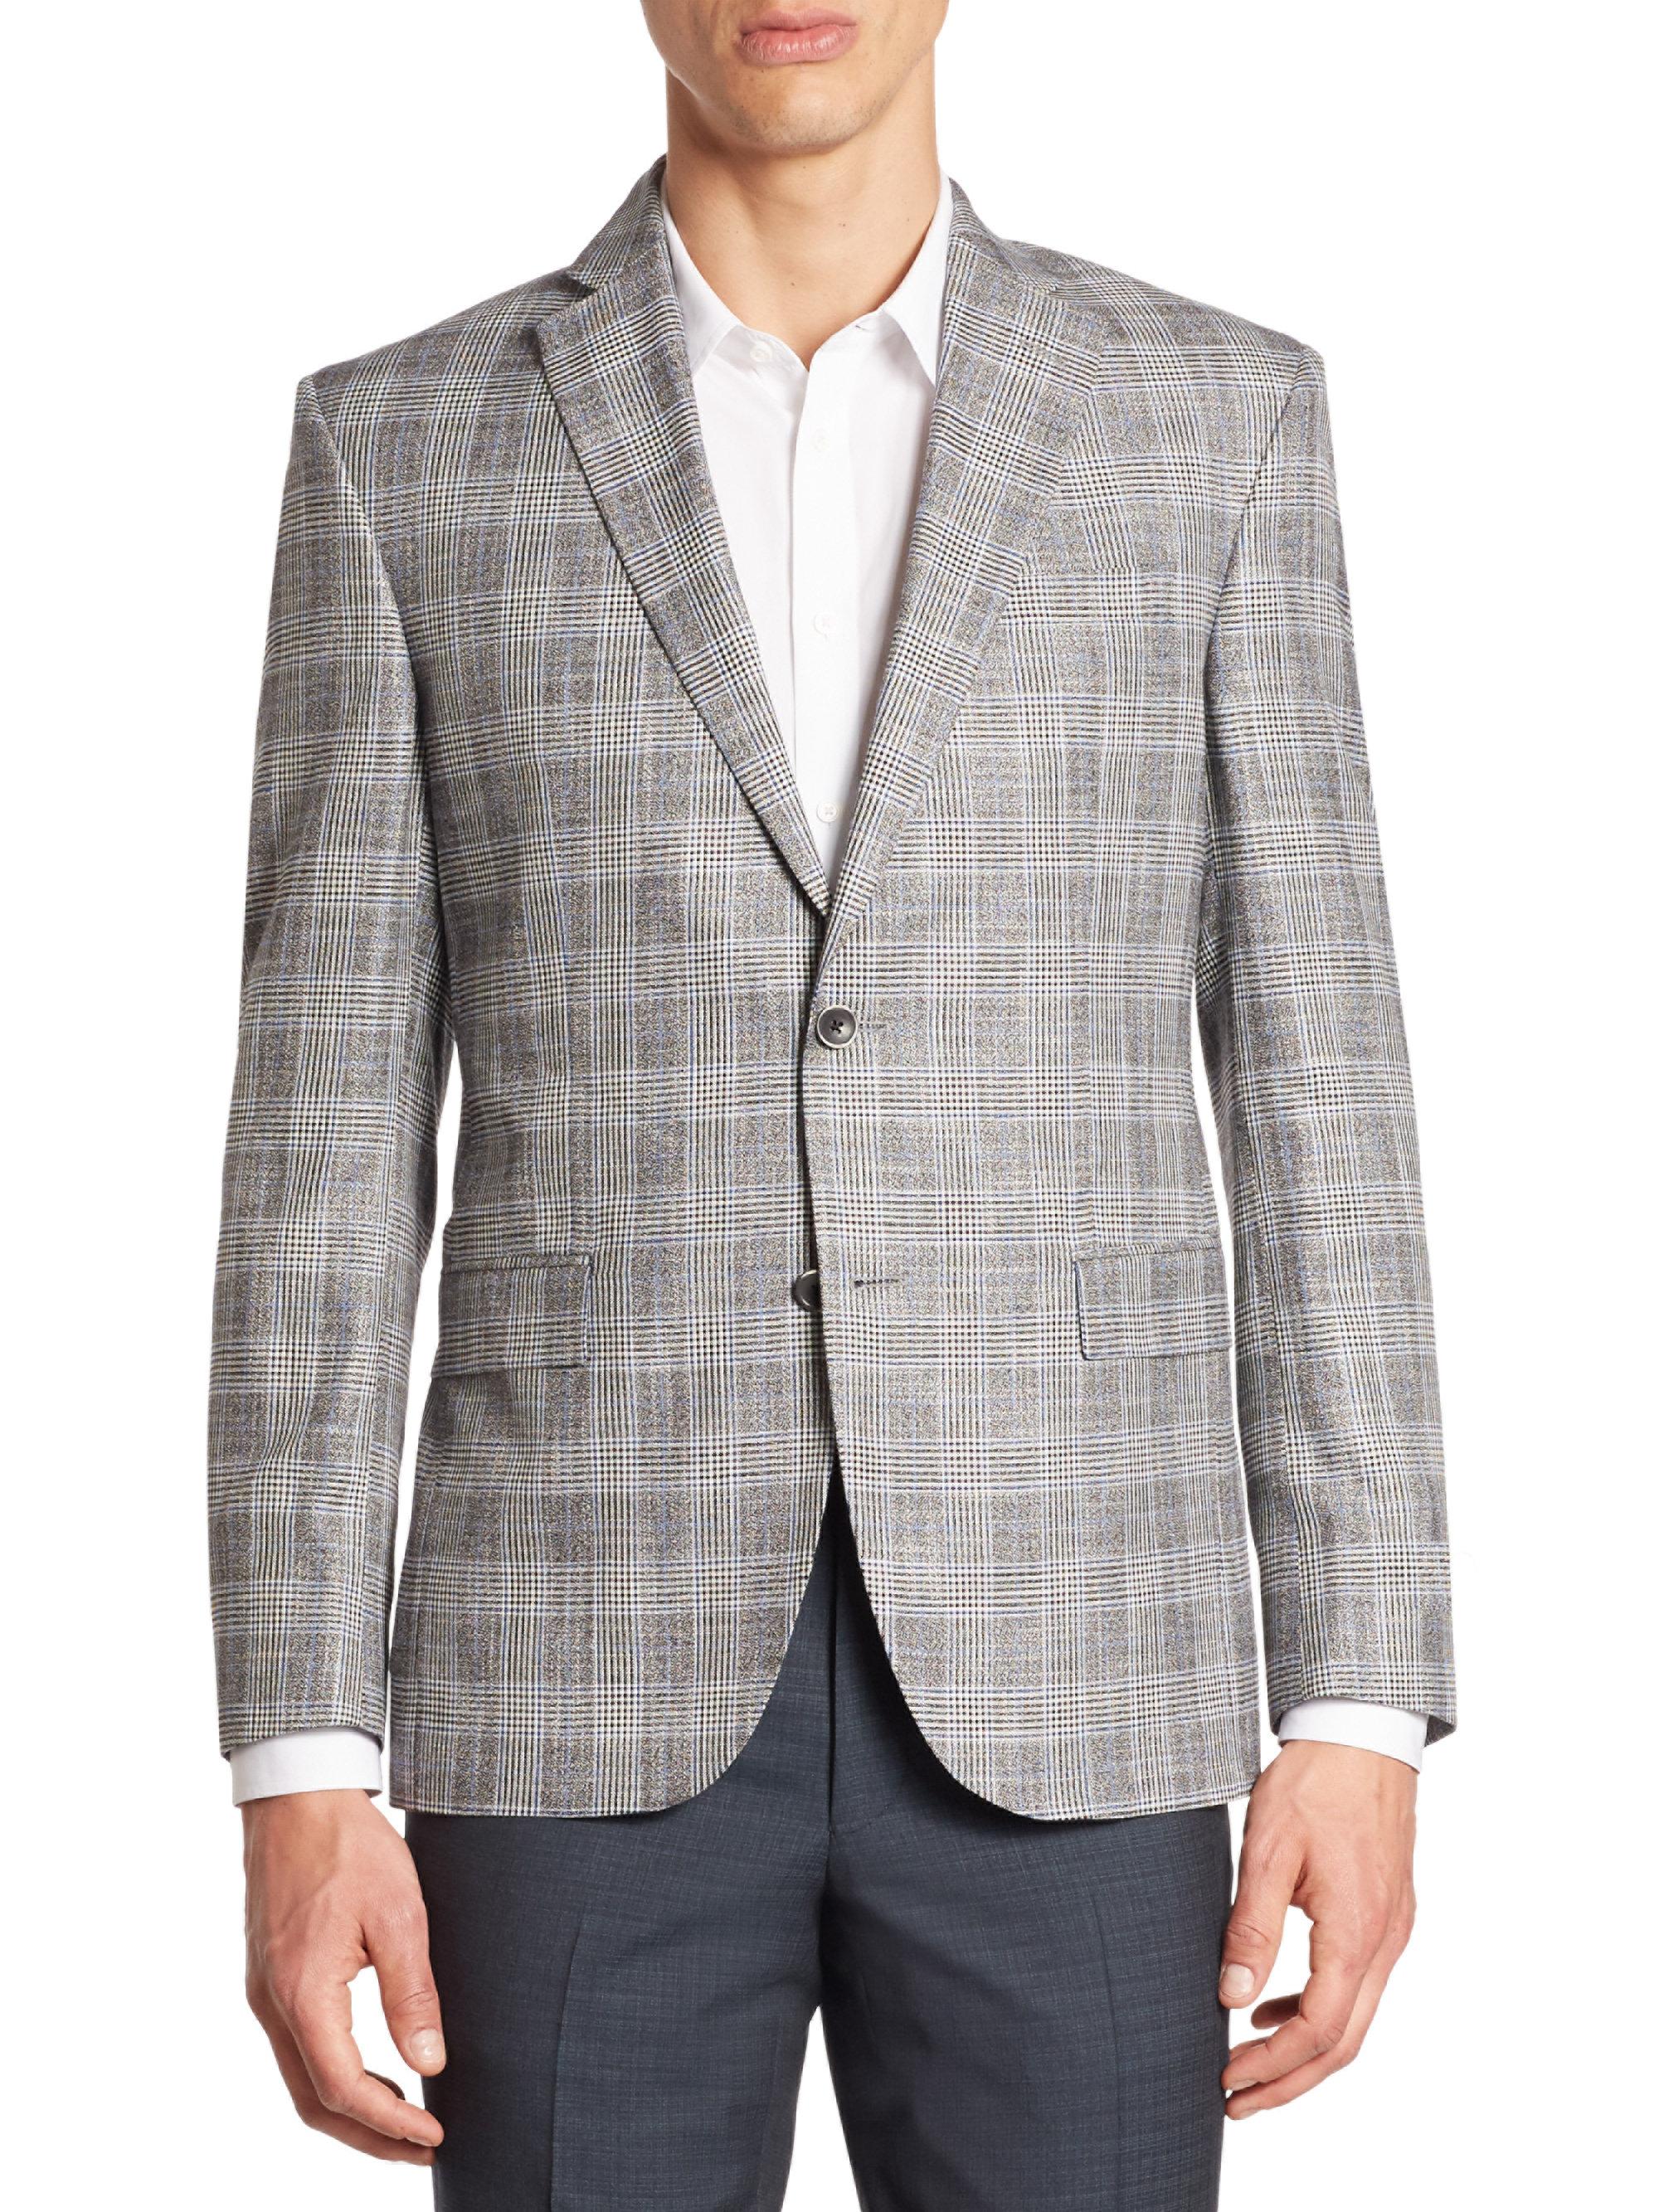 Lyst - Saks Fifth Avenue Multi Plaid Bamboo Jacket in Black for Men